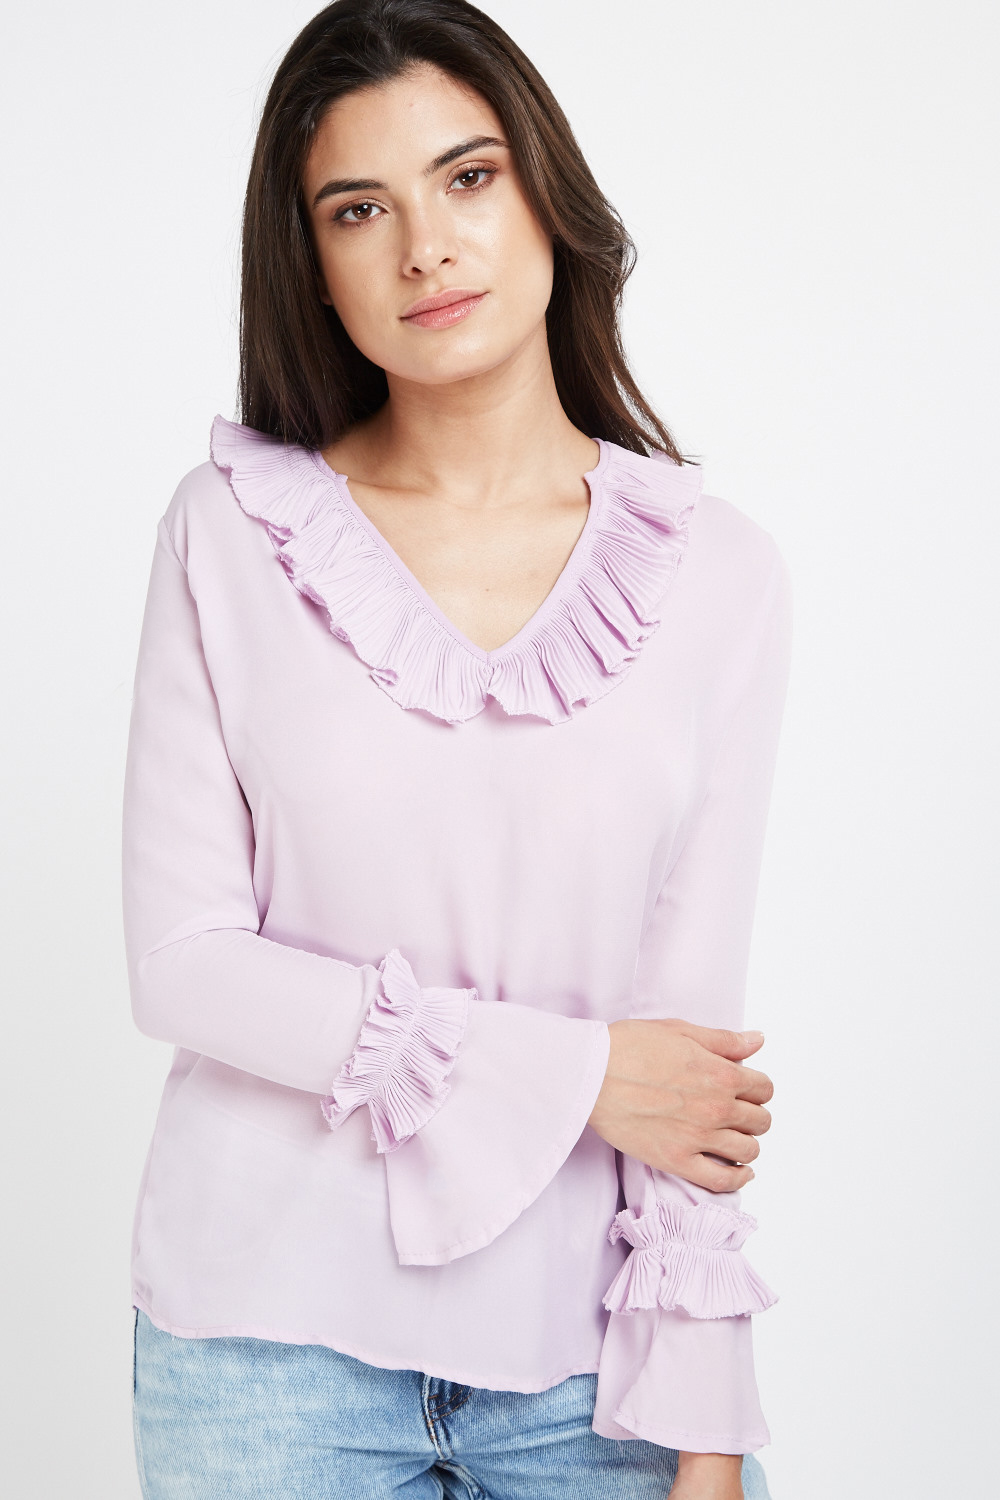 Pleated Ruffle Trim Sheer Blouse - Just $3